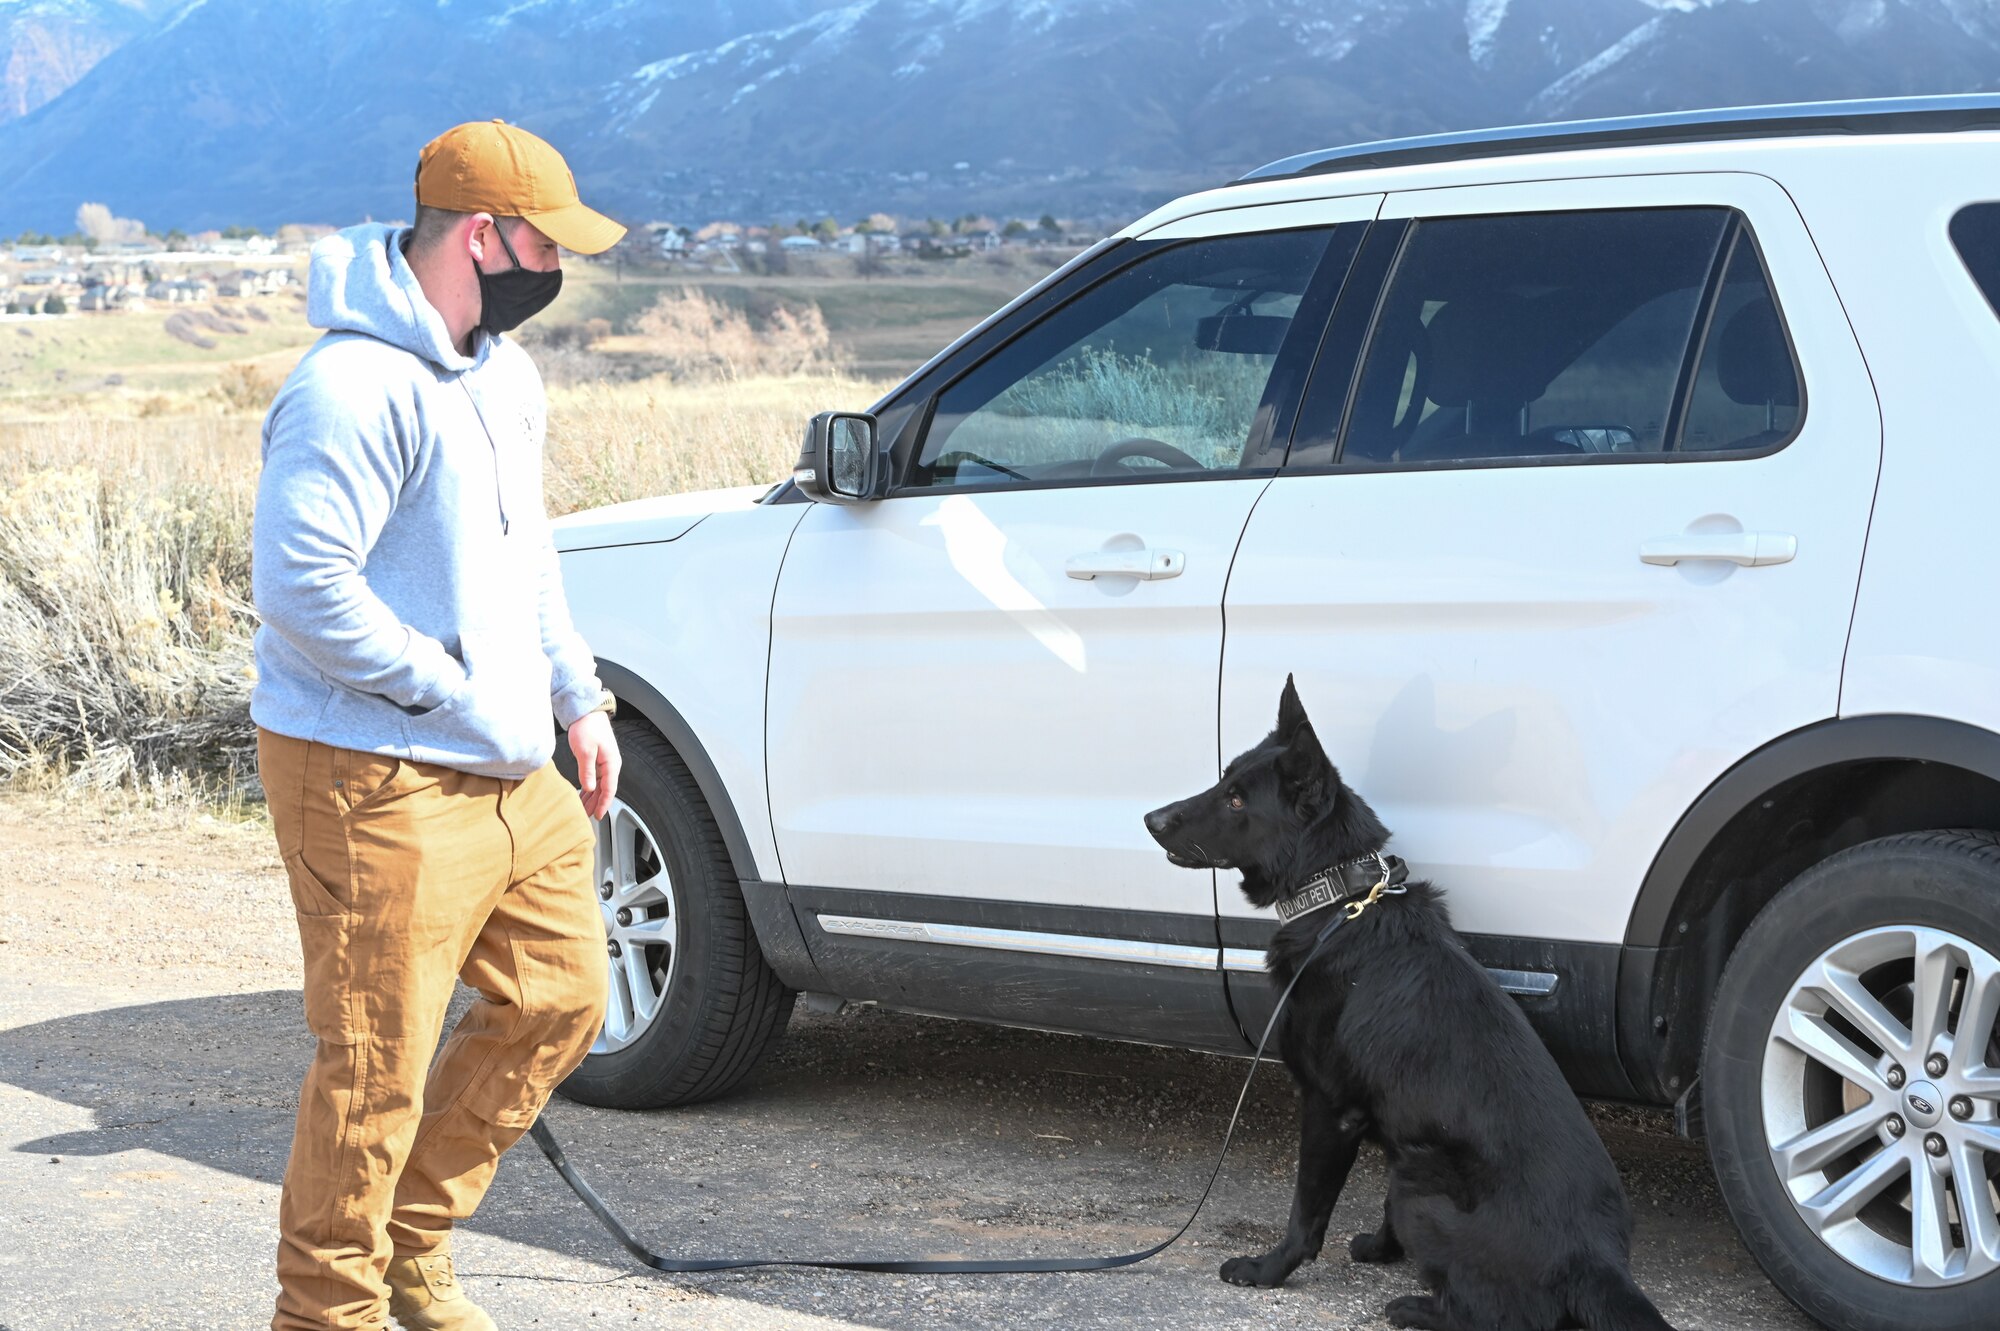 Military Working Dog Tusko, 75th Security Forces Squadron, demonstrates an indication sign that he has sniffed out drug materials in a vehicle during training with his handler, Senior Airman Brendan Smith, March 10, 2021, at Hill Air Force Base, Utah.(U.S. Air Force photo by Cynthia Griggs)